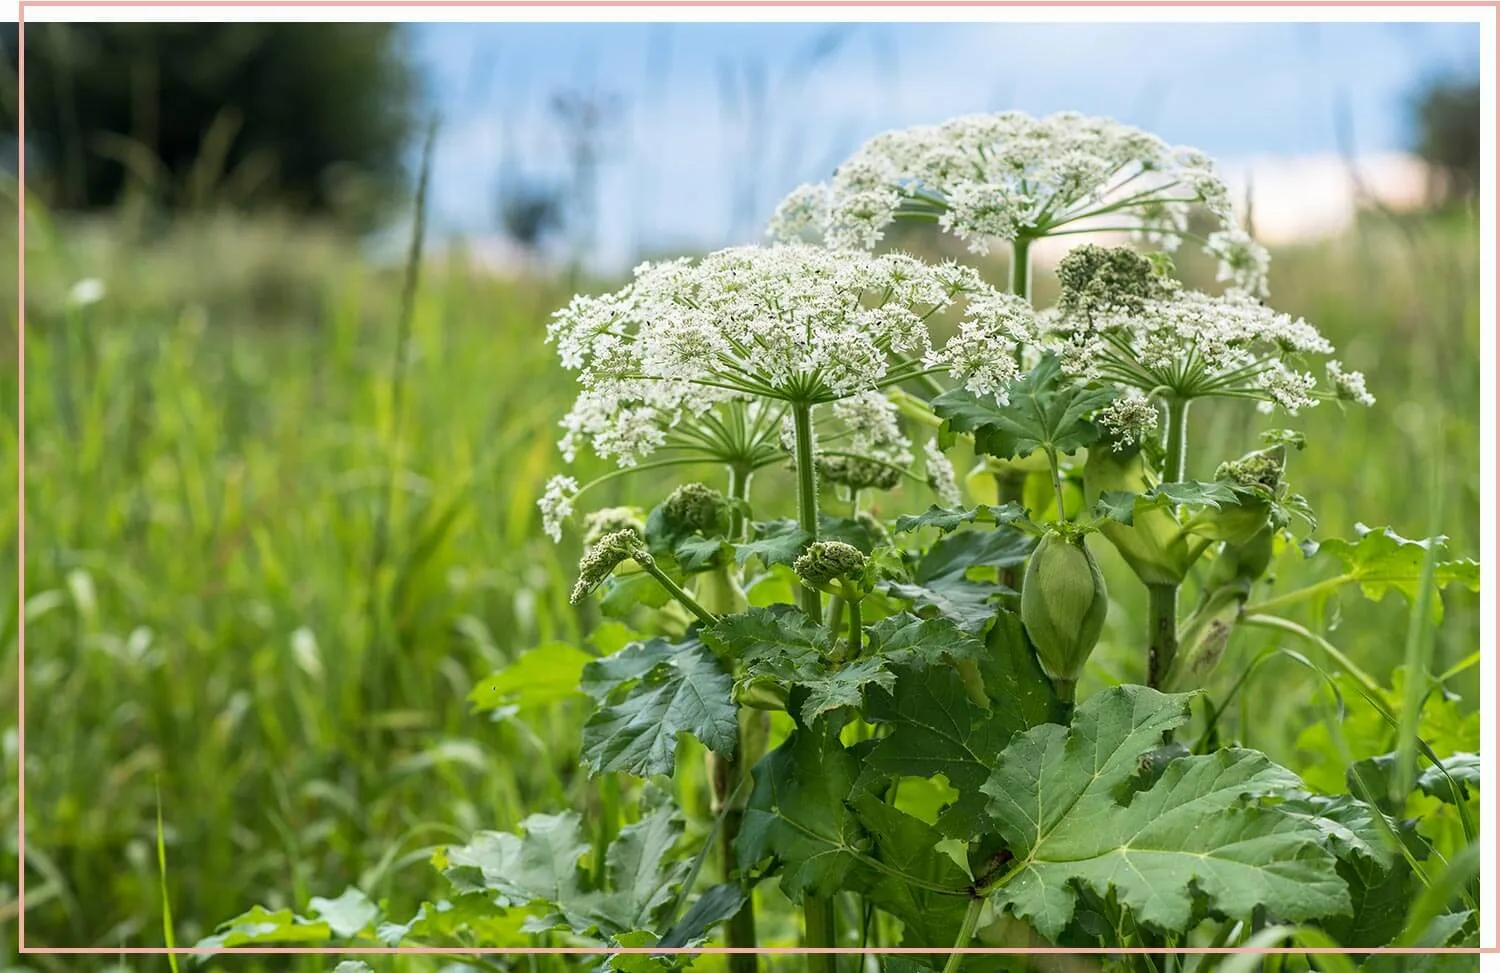 flowering-weeds-and-unexpected-beauty-23-giant-hogweed